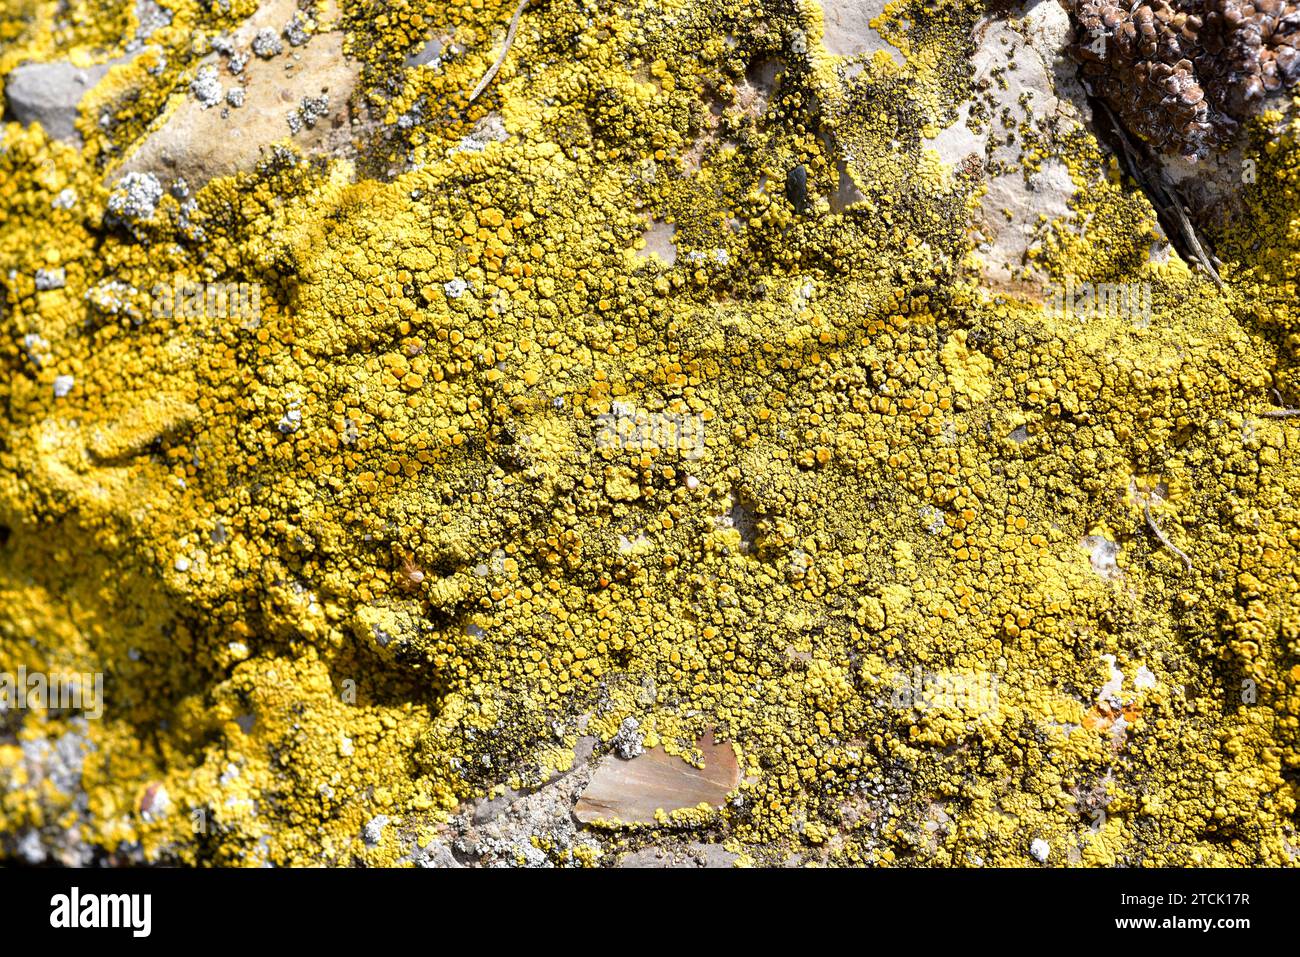 Candelariella vitellina is a subsquamulose yellow lichen. This photo Was taken in Bellmunt d'Urgell, Lleida province, Catalonia, Spain. Stock Photo